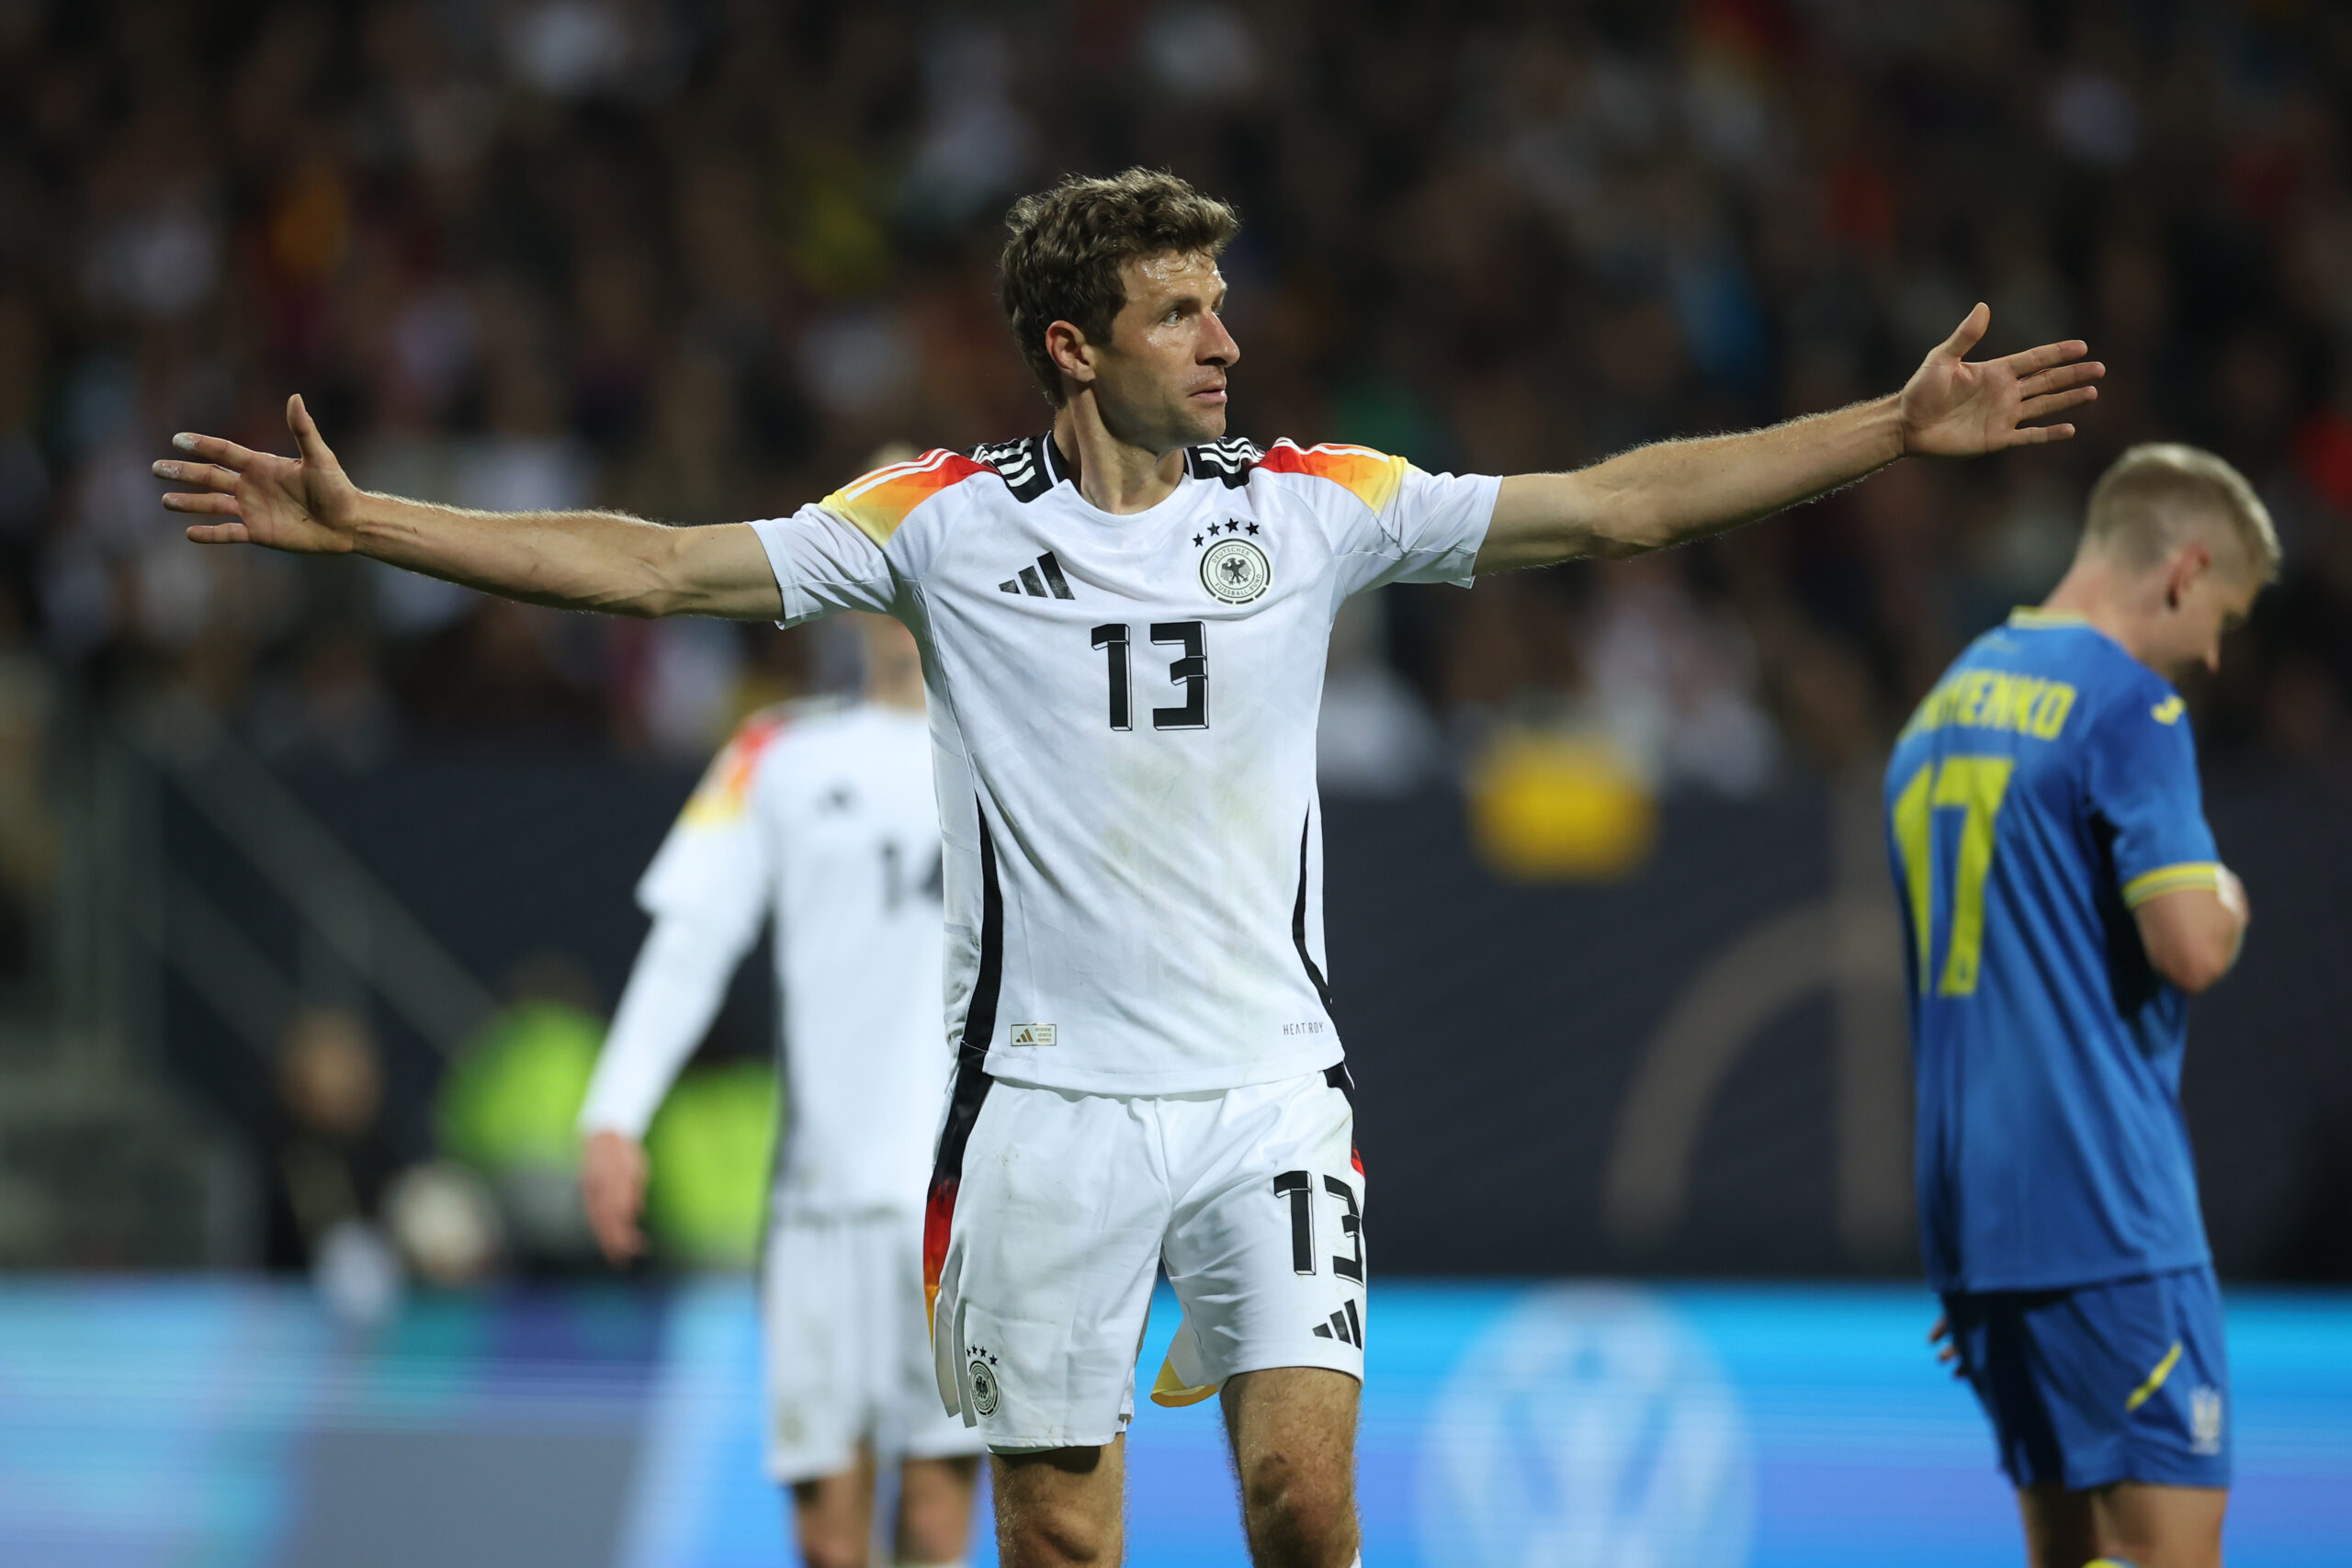 Thomas Muller and Jamal Musiala should help Manchester United protect their superstar from Bayern Munich